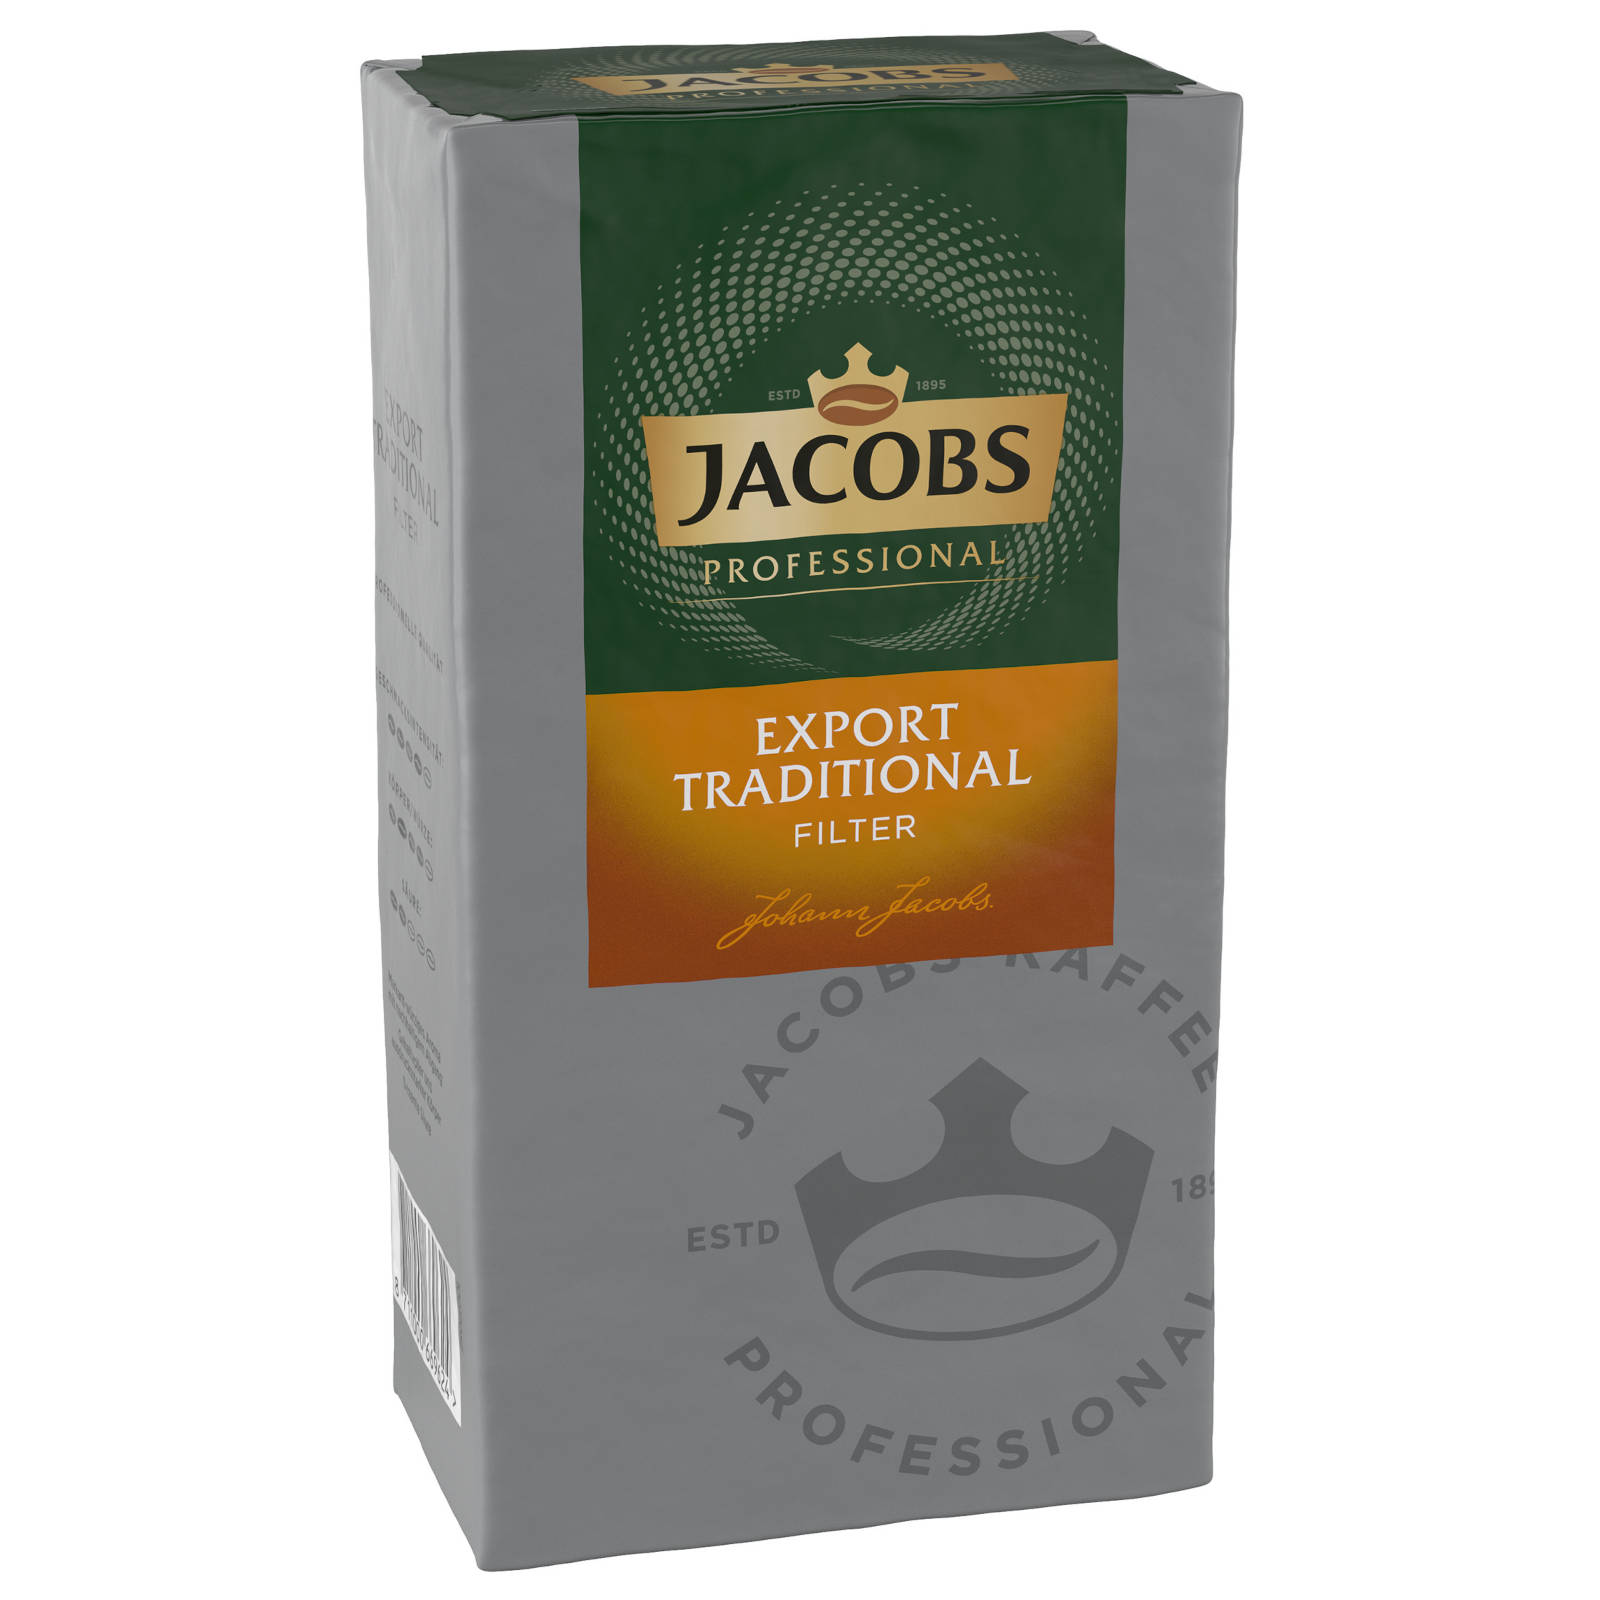 JACOBS Professional Export Traditional Filterkaffee 12x500 (Filter, French g Press)